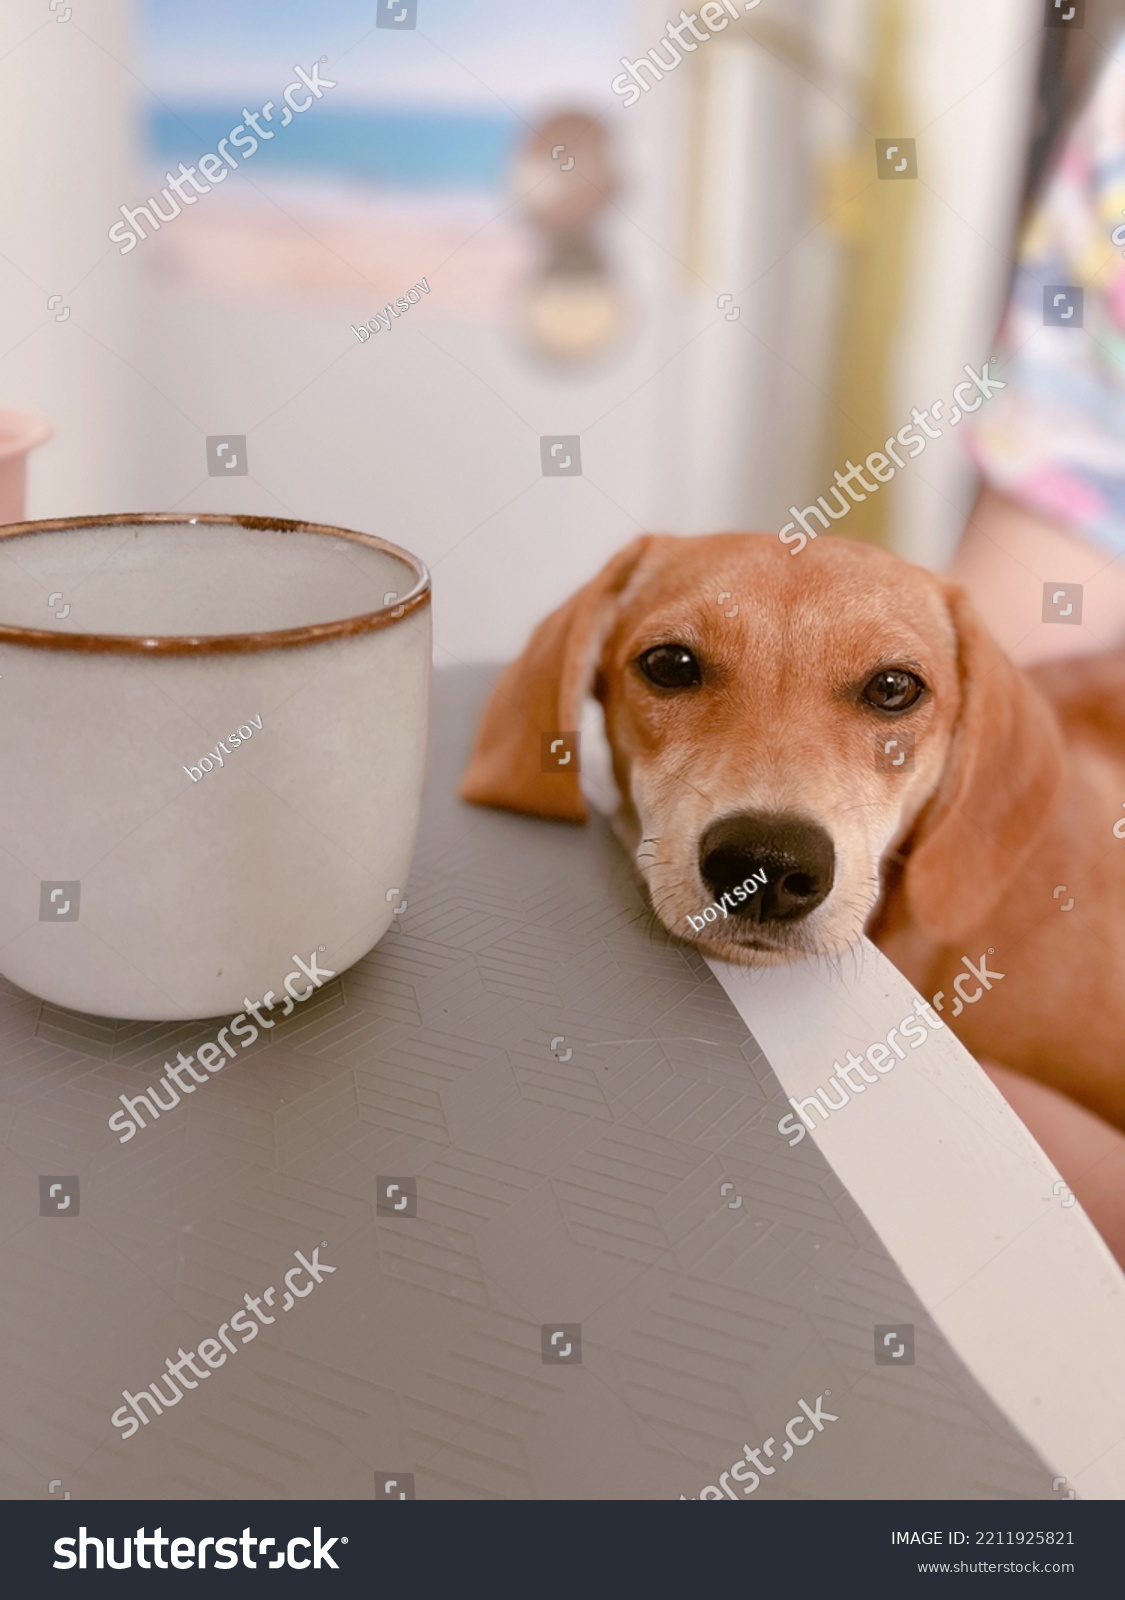 Adorable brown puppy with sad emotion lying on a table with cup standing on it. Ginger cute dachshund doggy. High quality vertical photo #2211925821